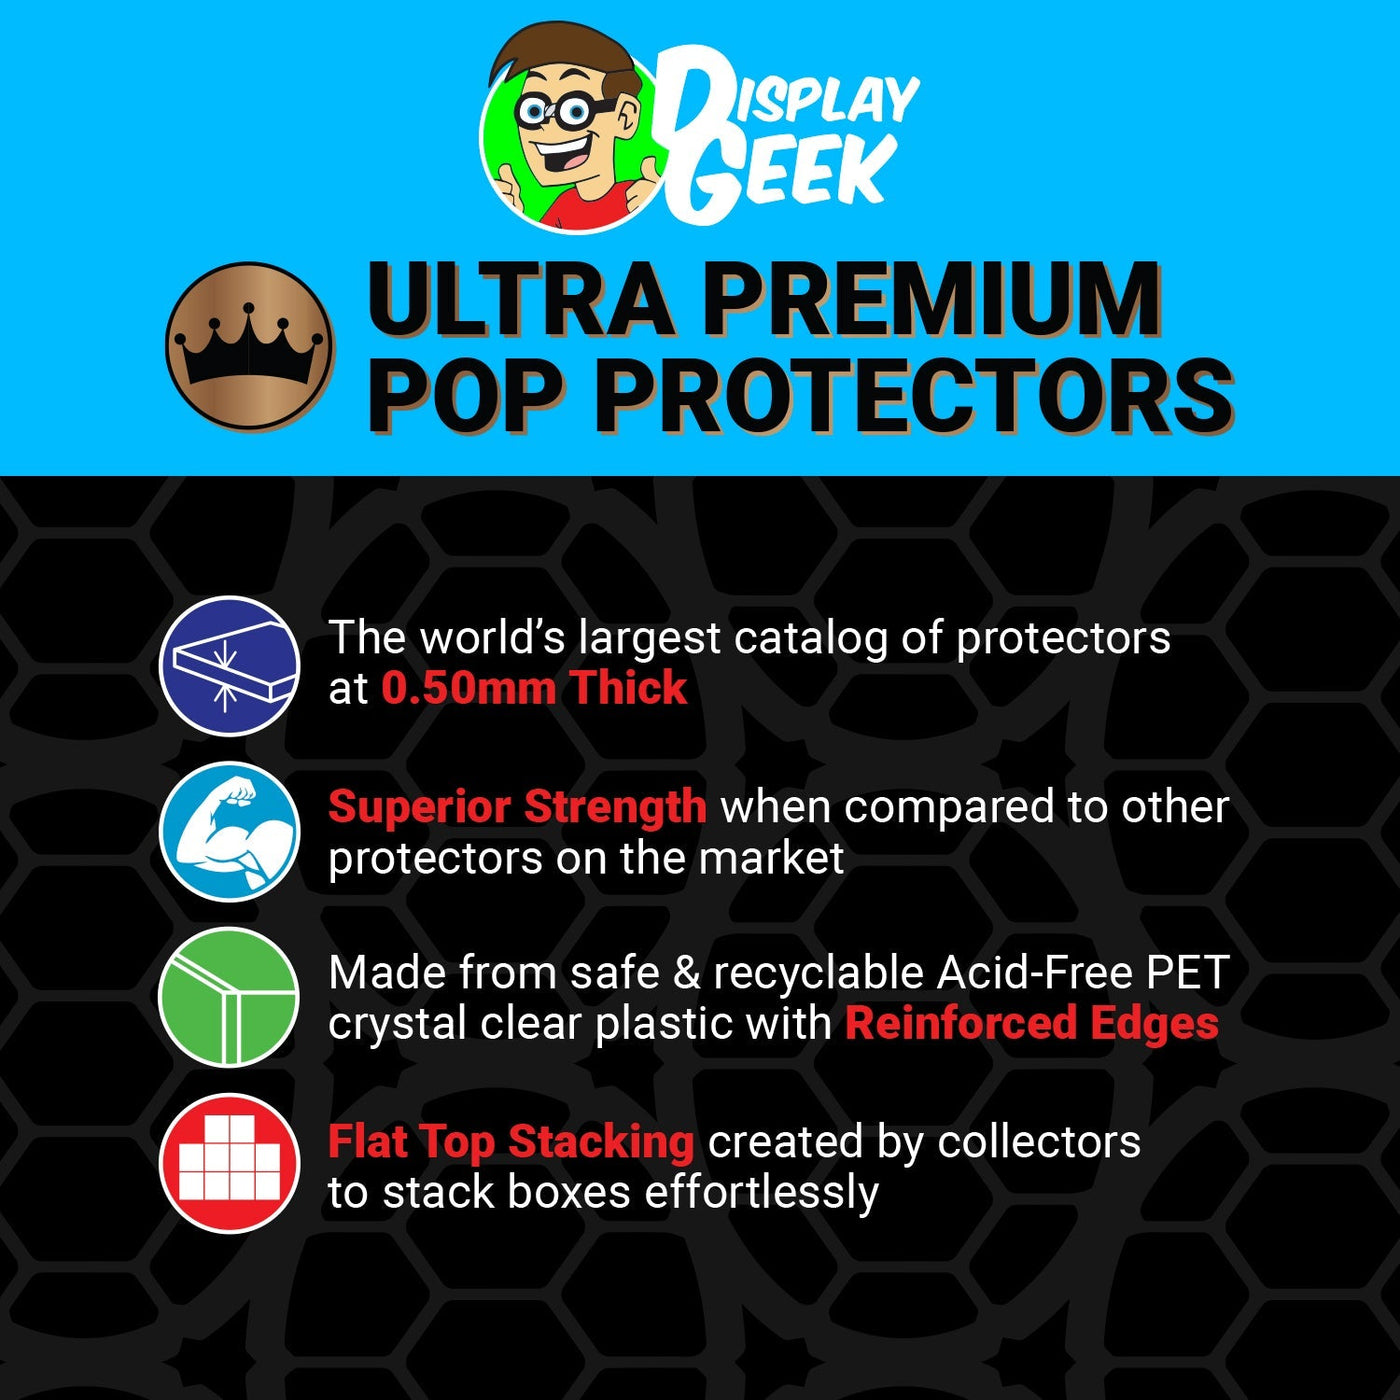 Pop Protector for Thor Ragnarok Funko Pop Pez on The Protector Guide App by Display Geek